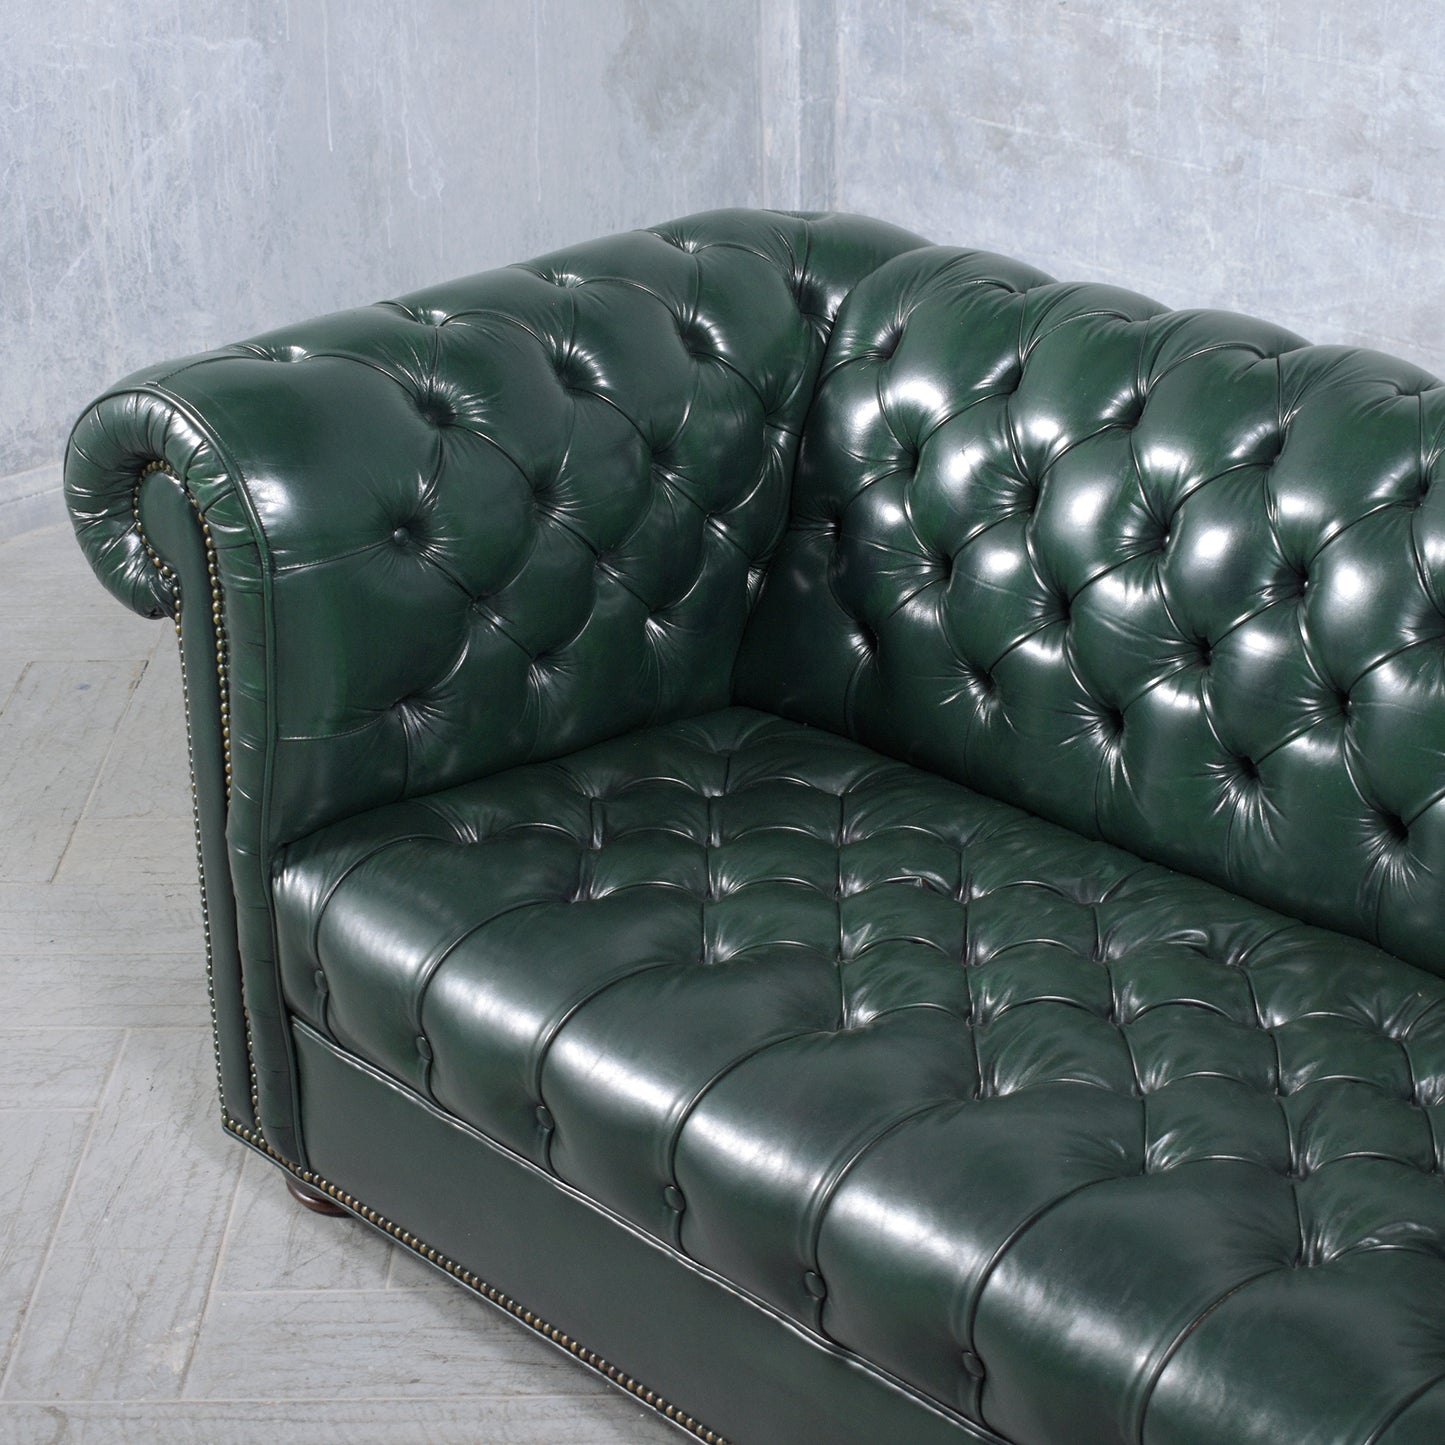 1970s Vintage Chesterfield Sofa: Emerald Green Leather with Elegant Carved Legs